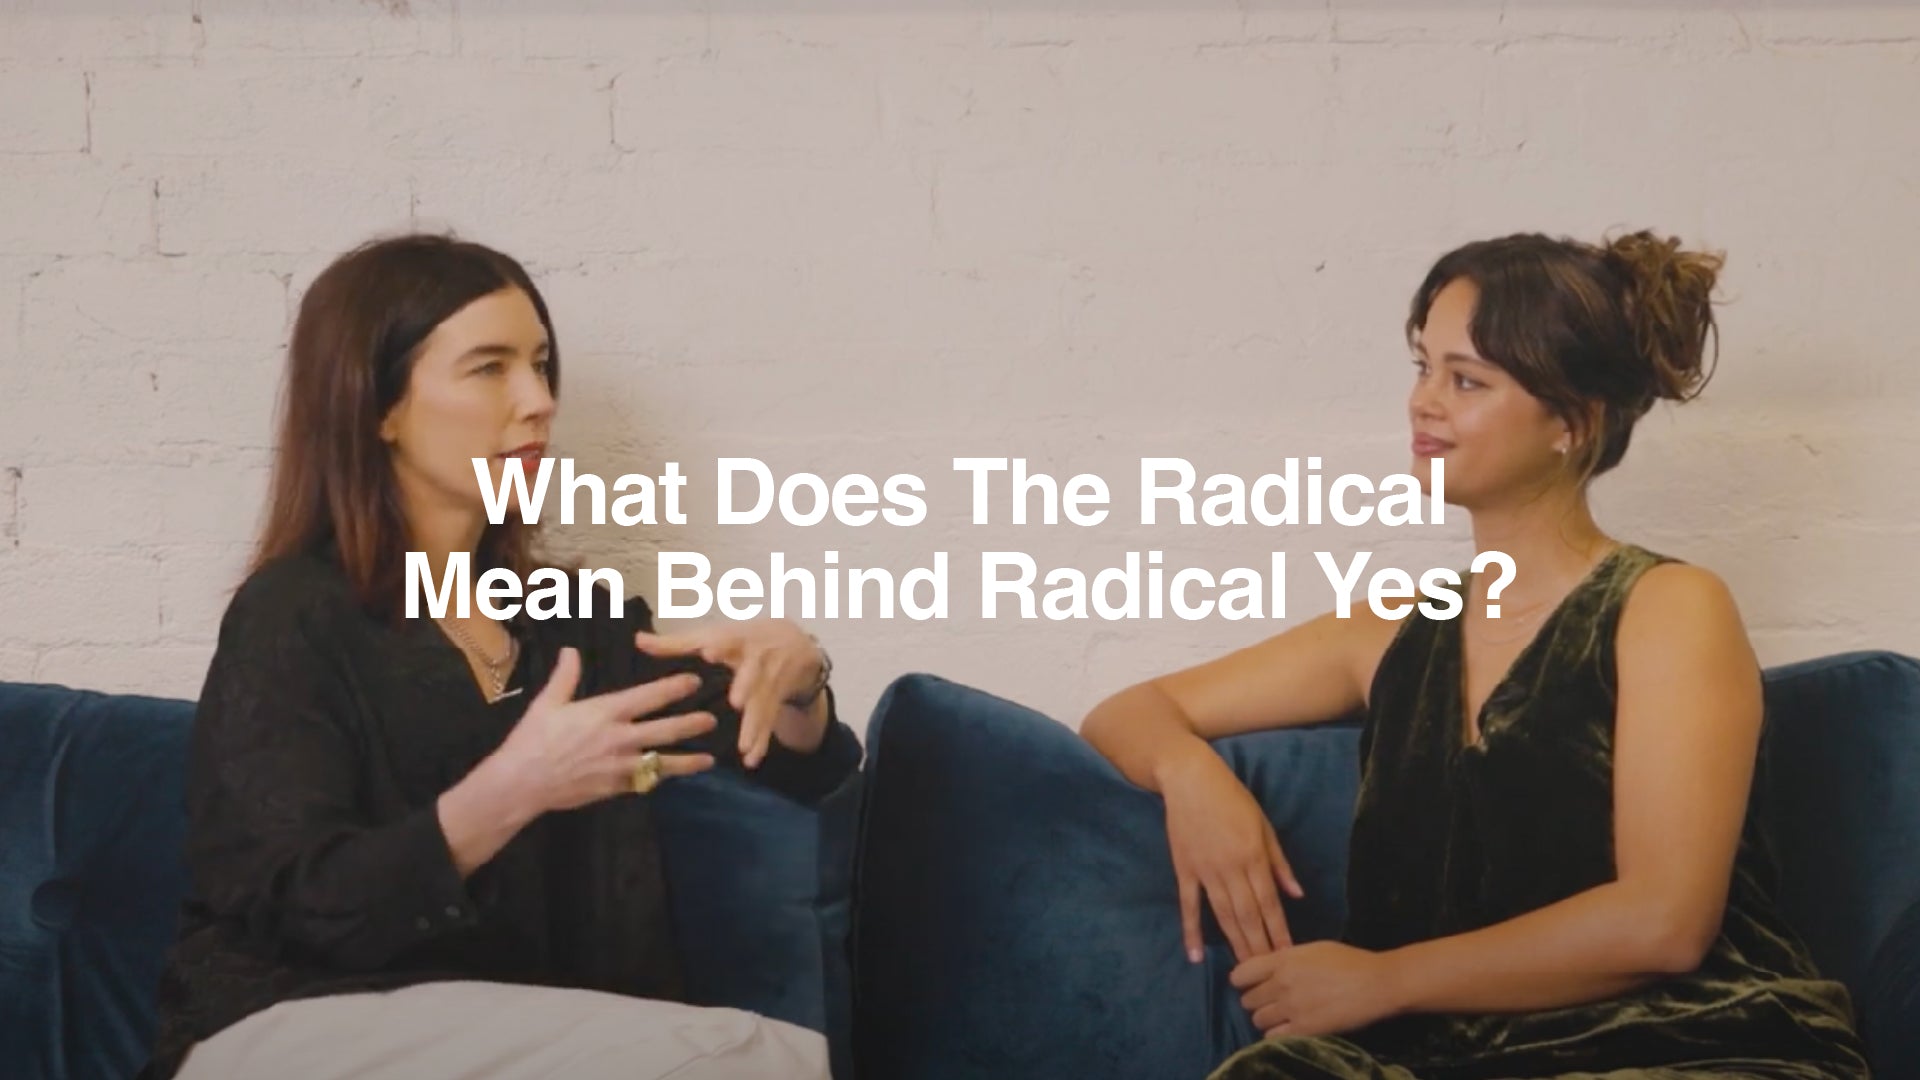 Radical Yes: the meaning behind ‘radical’